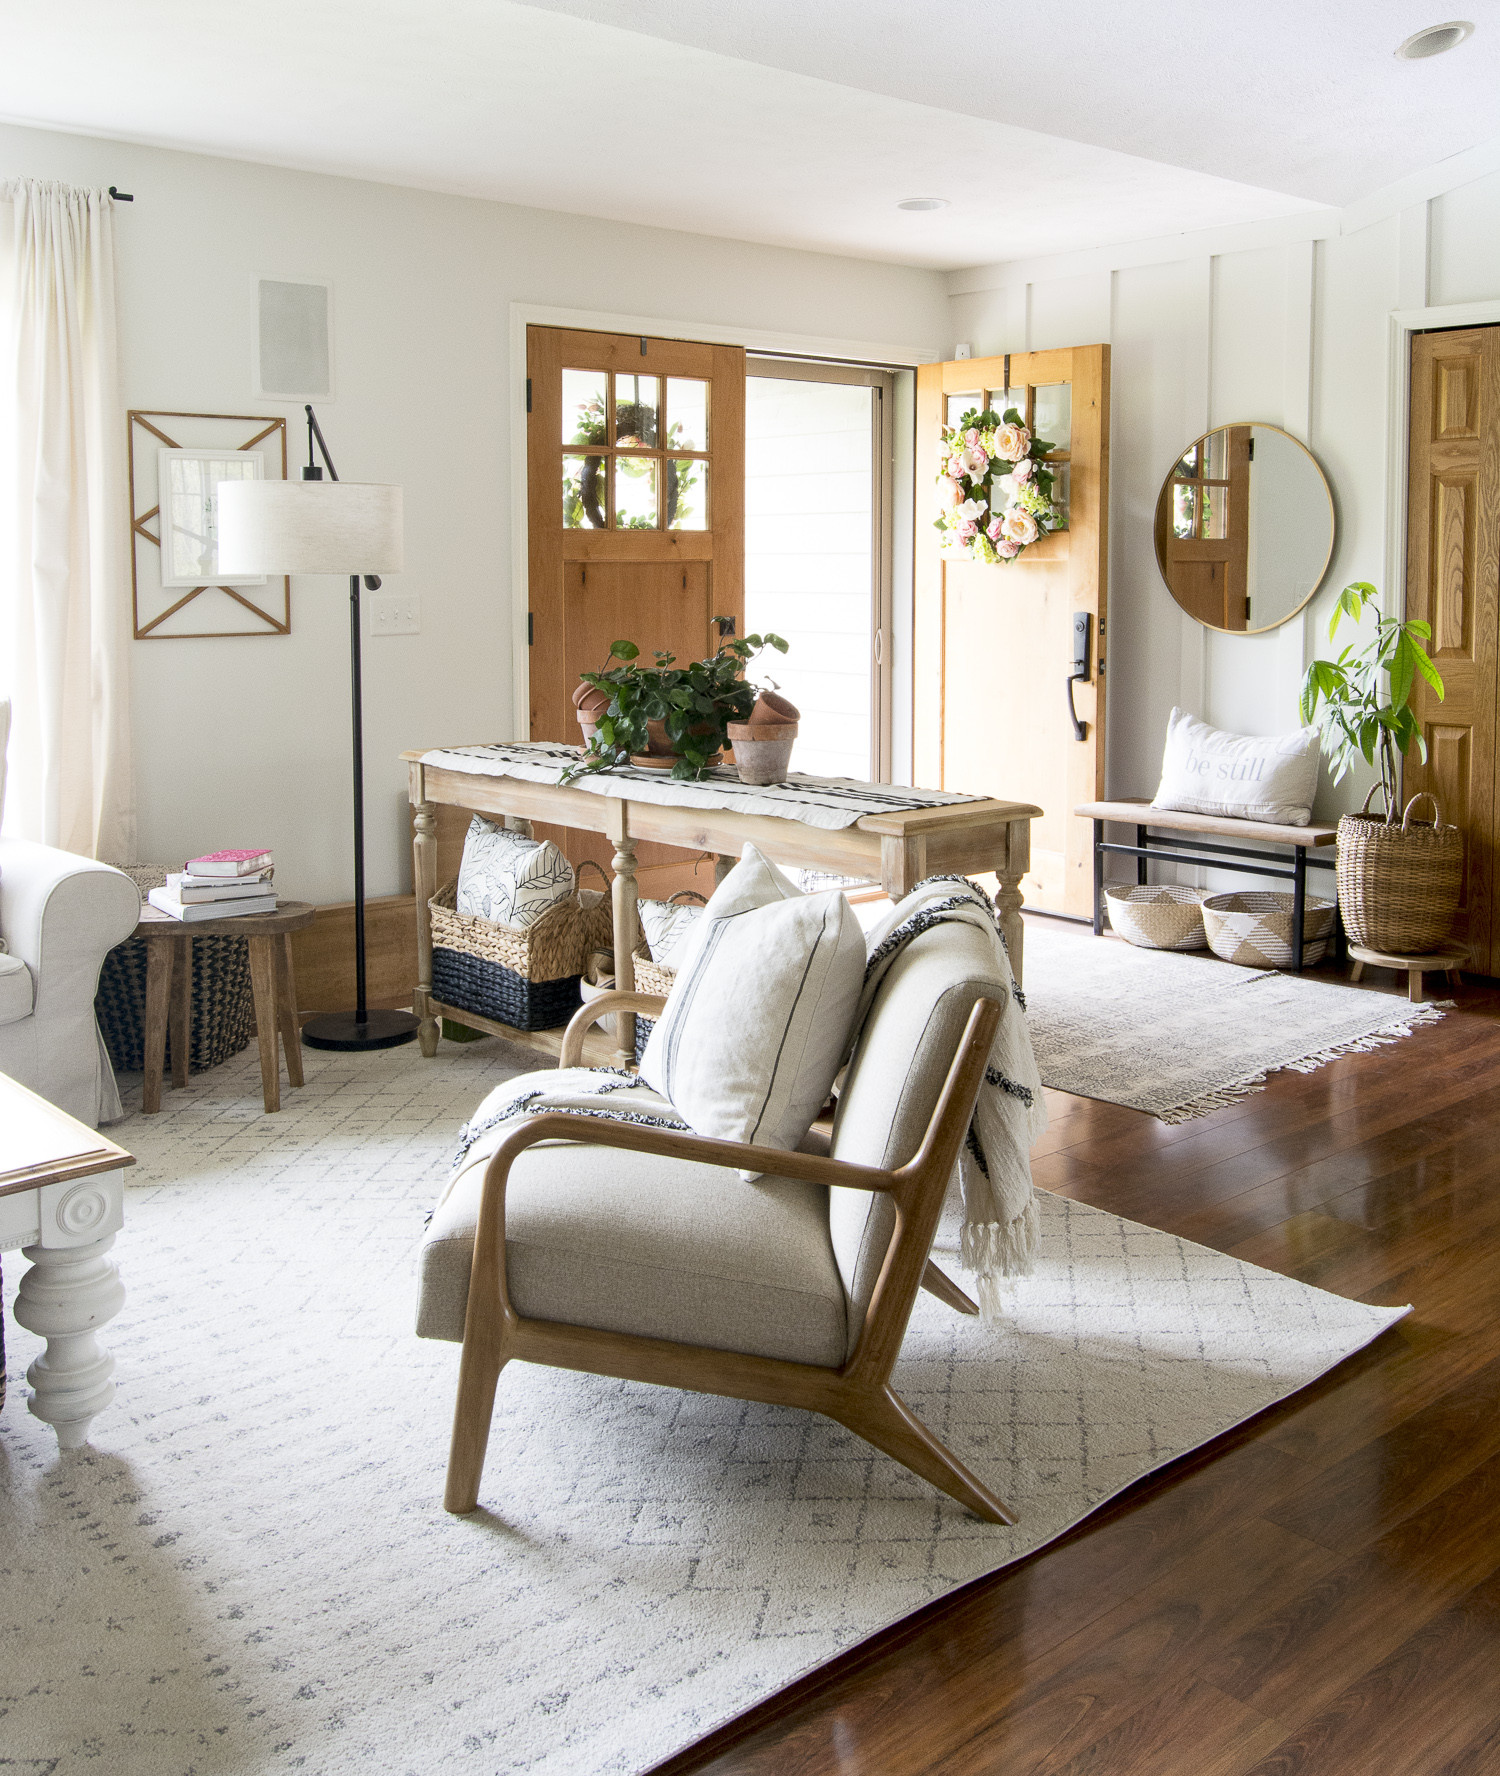 Farmhouse Style Living Room
 How to Get the Modern Farmhouse Living Room Look